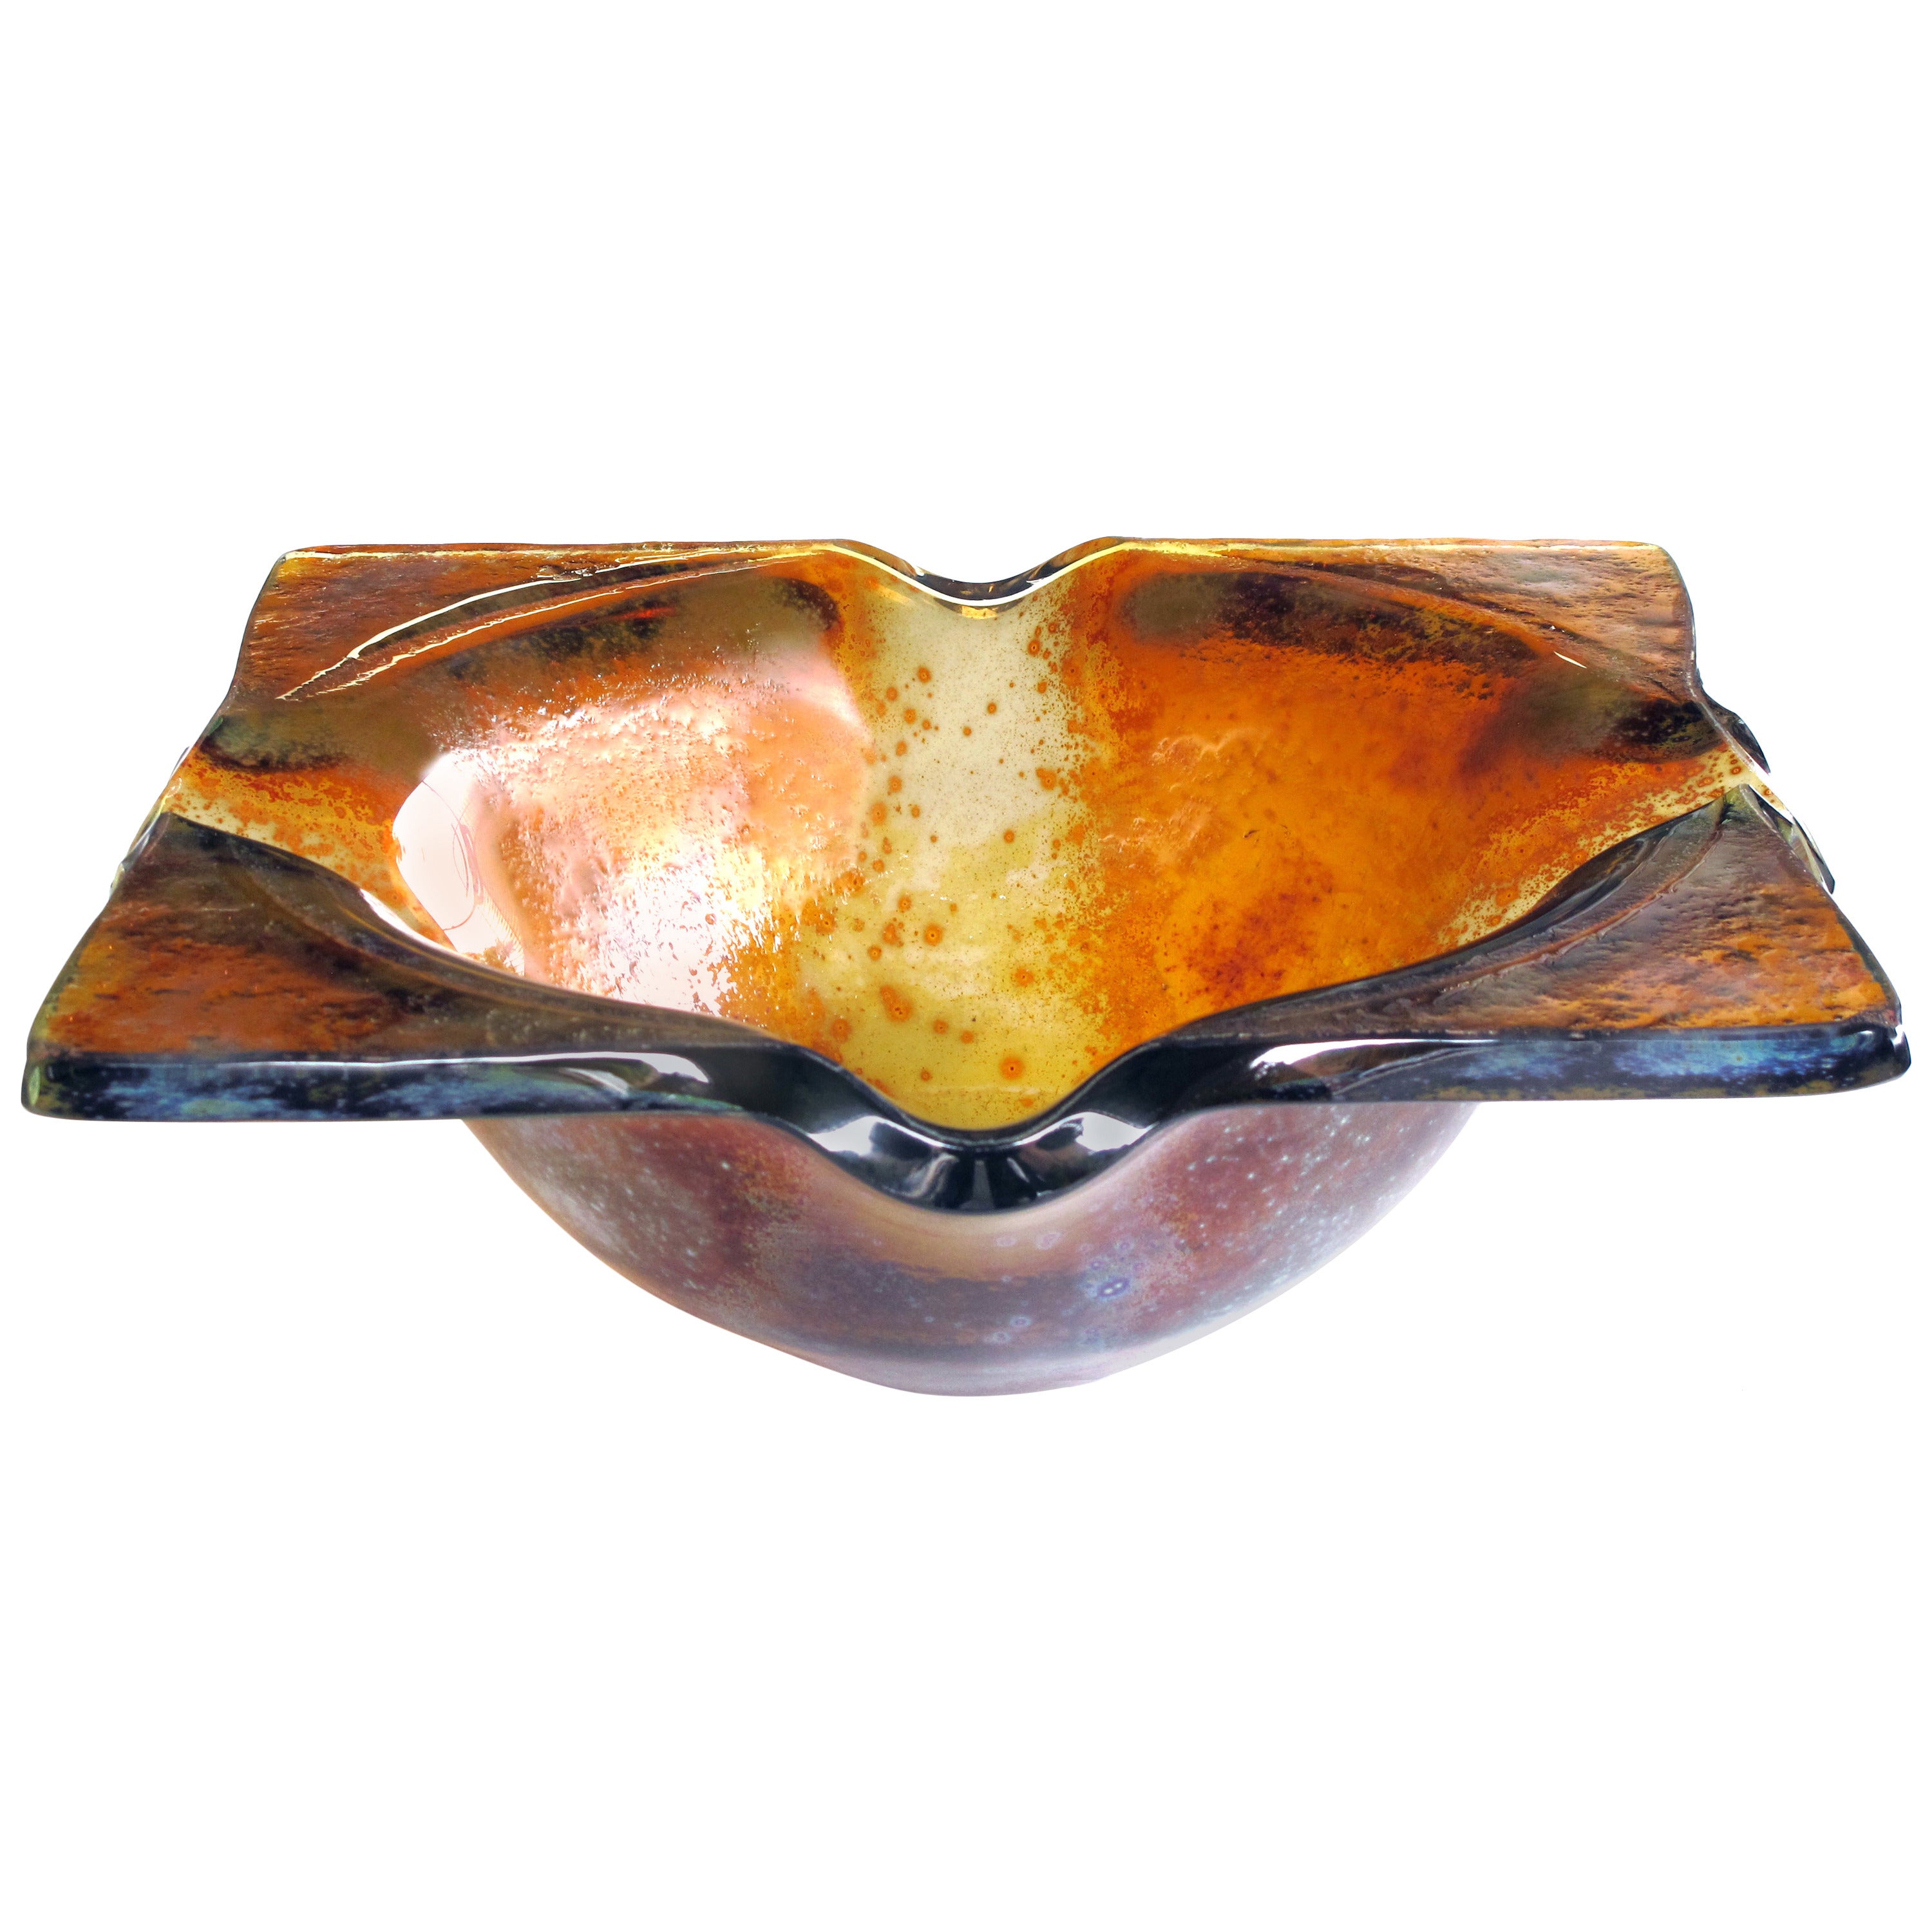 Thickly Modeled American Amber-Colored Bowl by Salvatore Polizzi